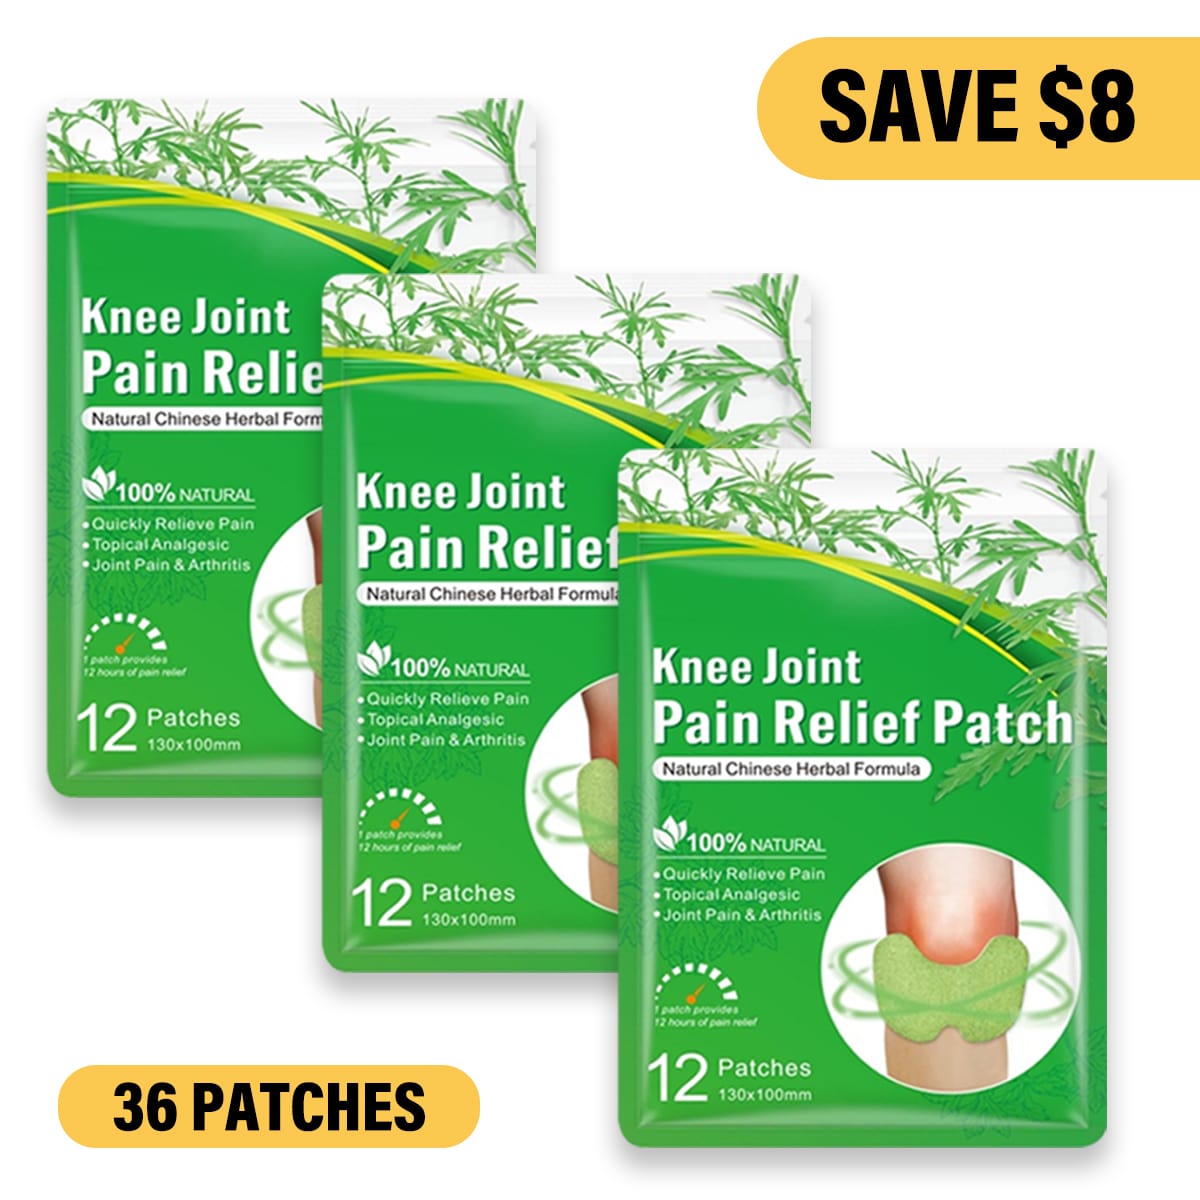 Flexiknee Natural Knee Pain Patch, Knee Joint Pain Relief Patch